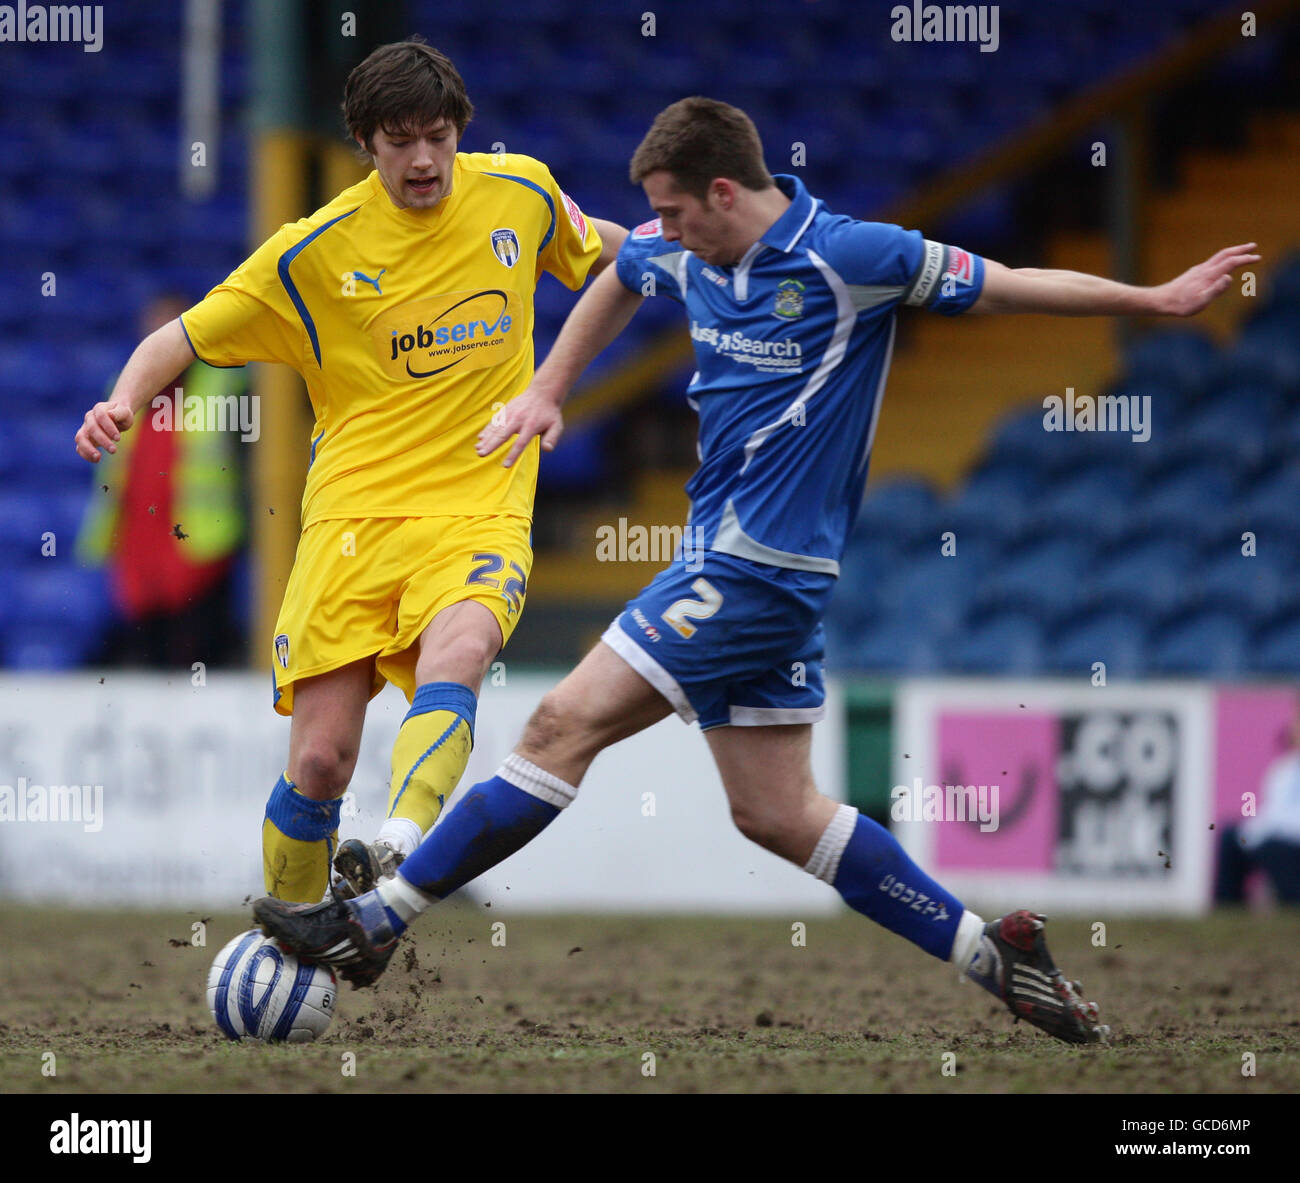 Colchester United's Anthony Wordsworth (left) and Stockport County's Johnny Mullins (right) battle for the ball during the Coca-Cola League One match at Edgeley Park, Stockport. Stock Photo